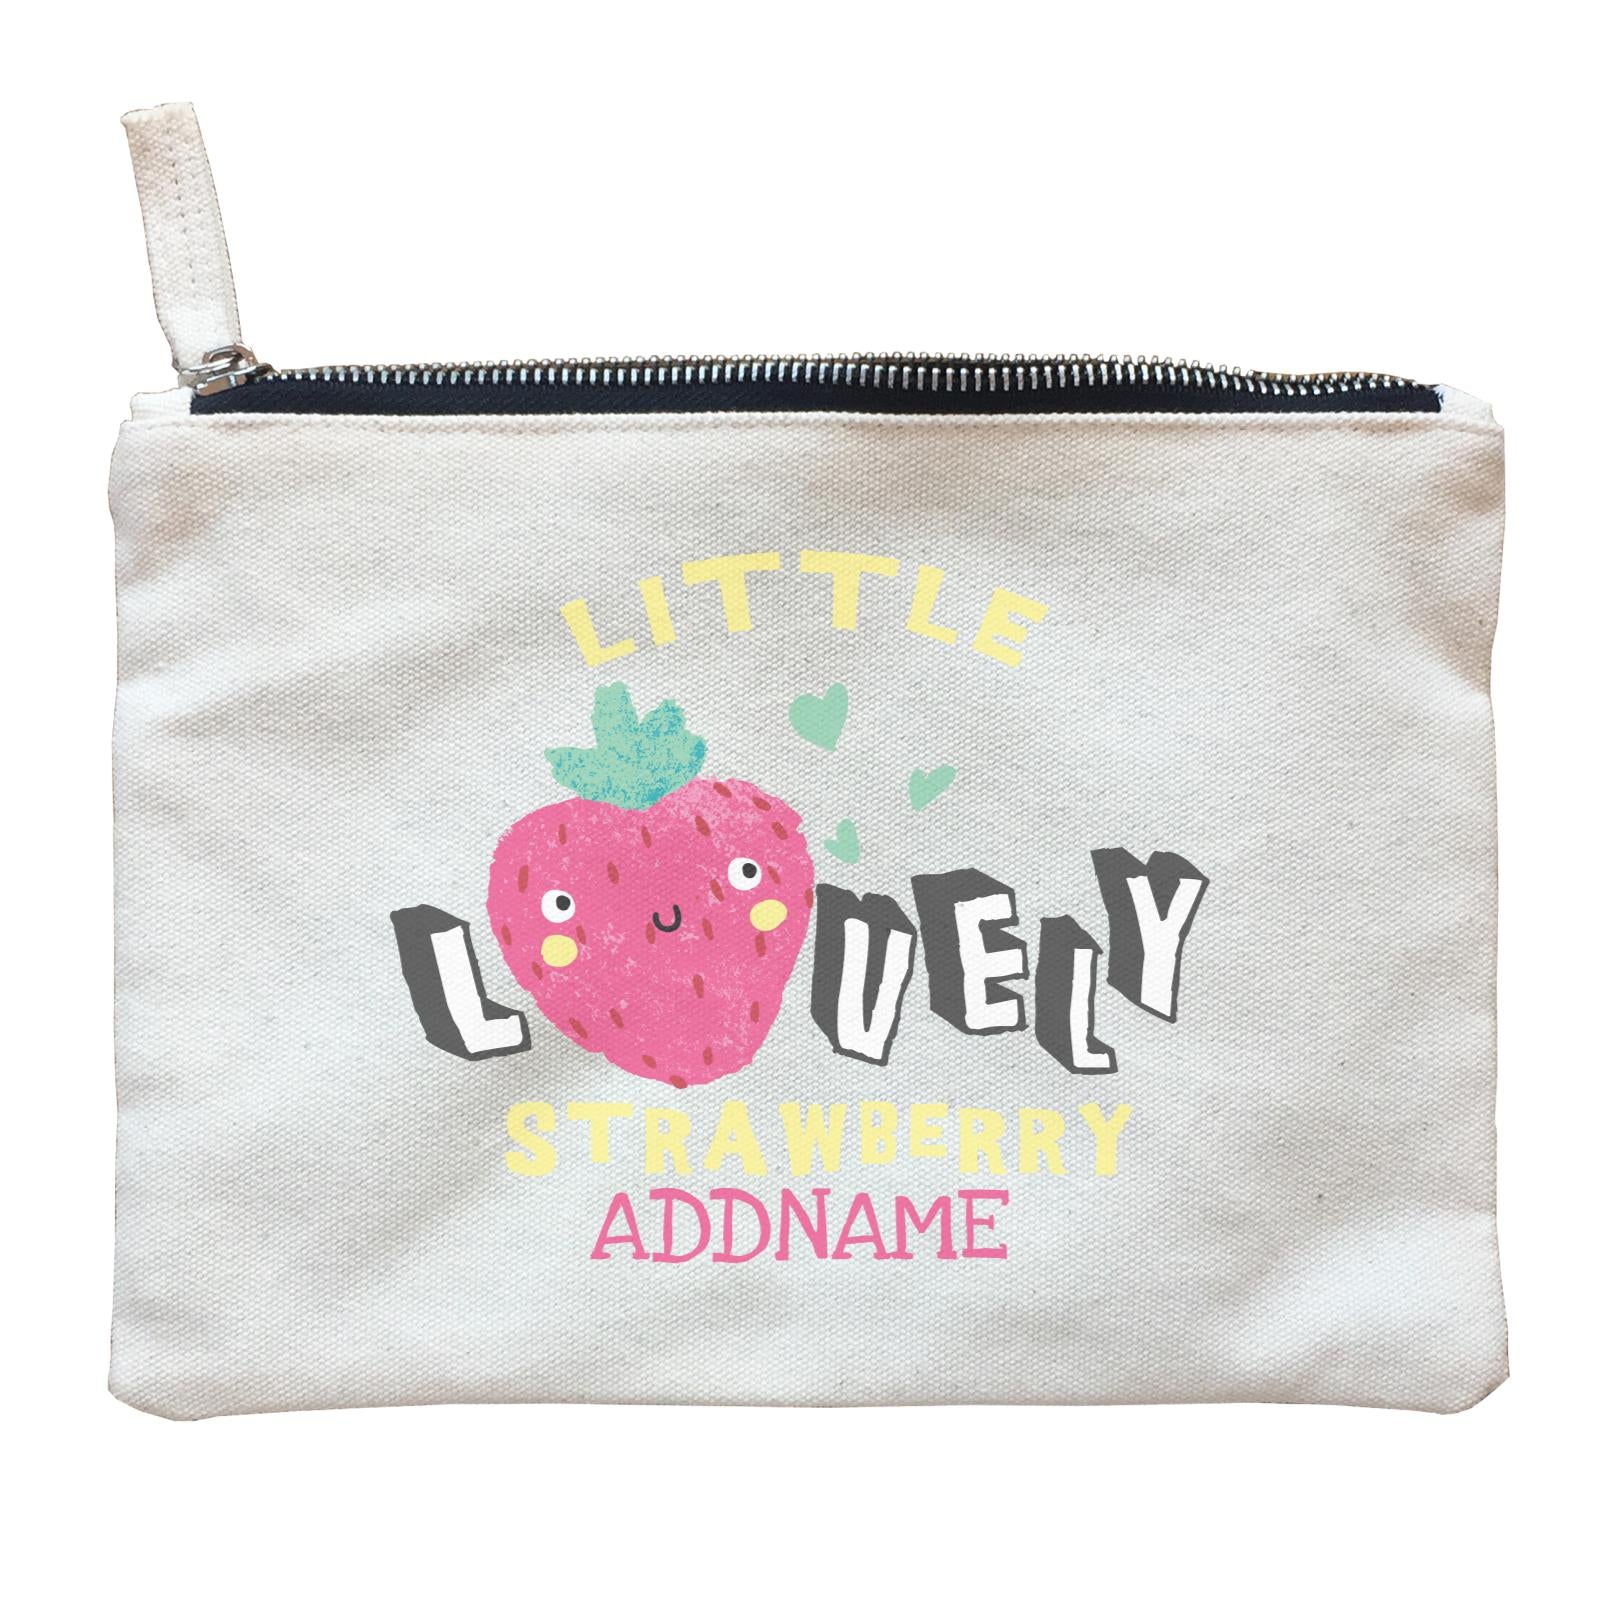 Little Lovely Strawberry Addname Zipper Pouch